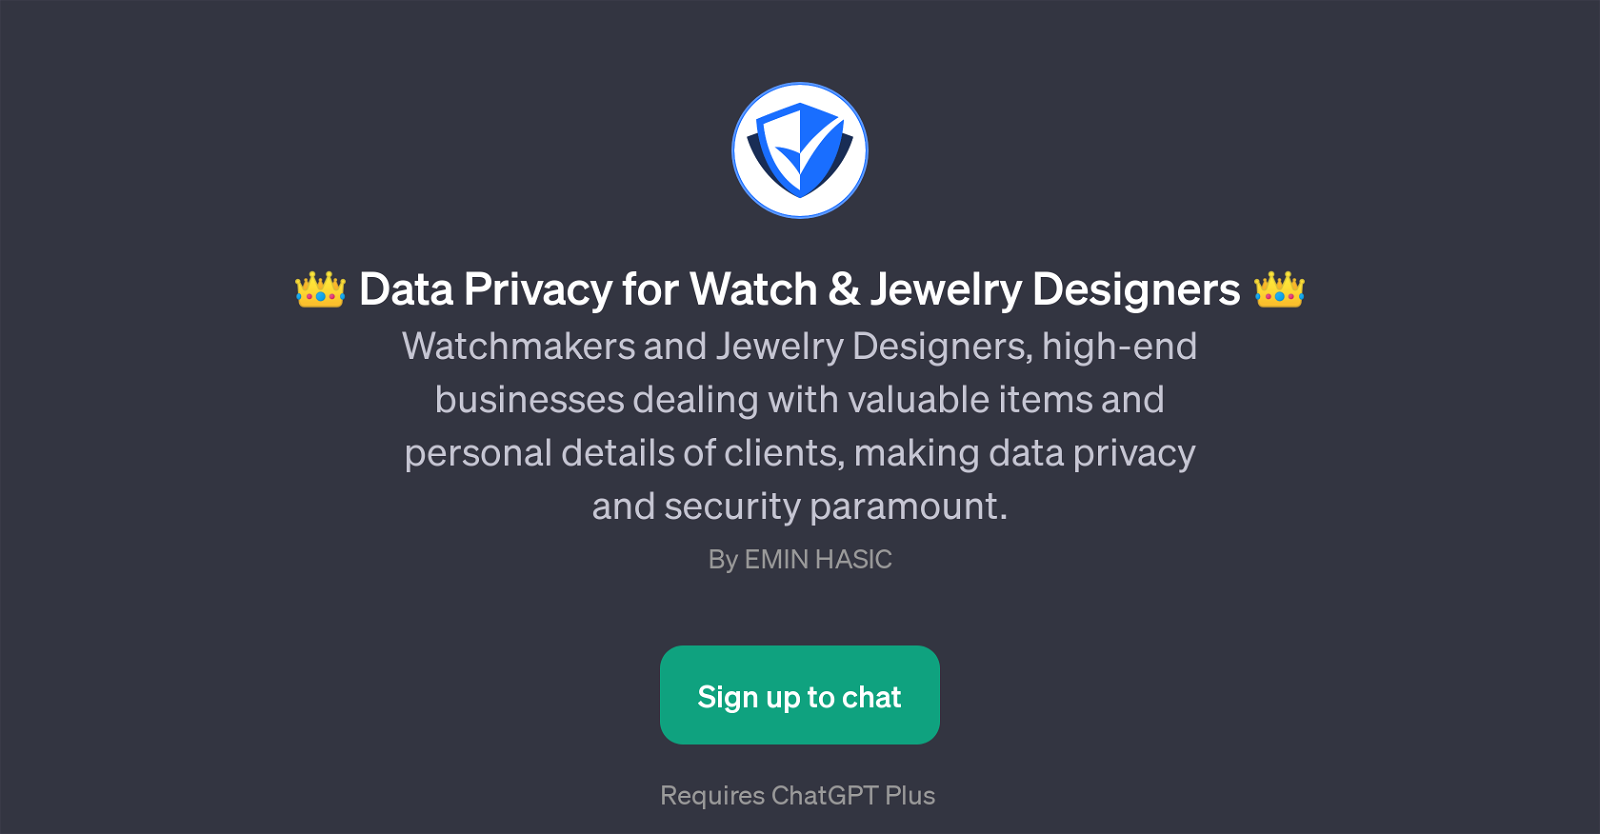 Data Privacy for Watch & Jewelry Designers website